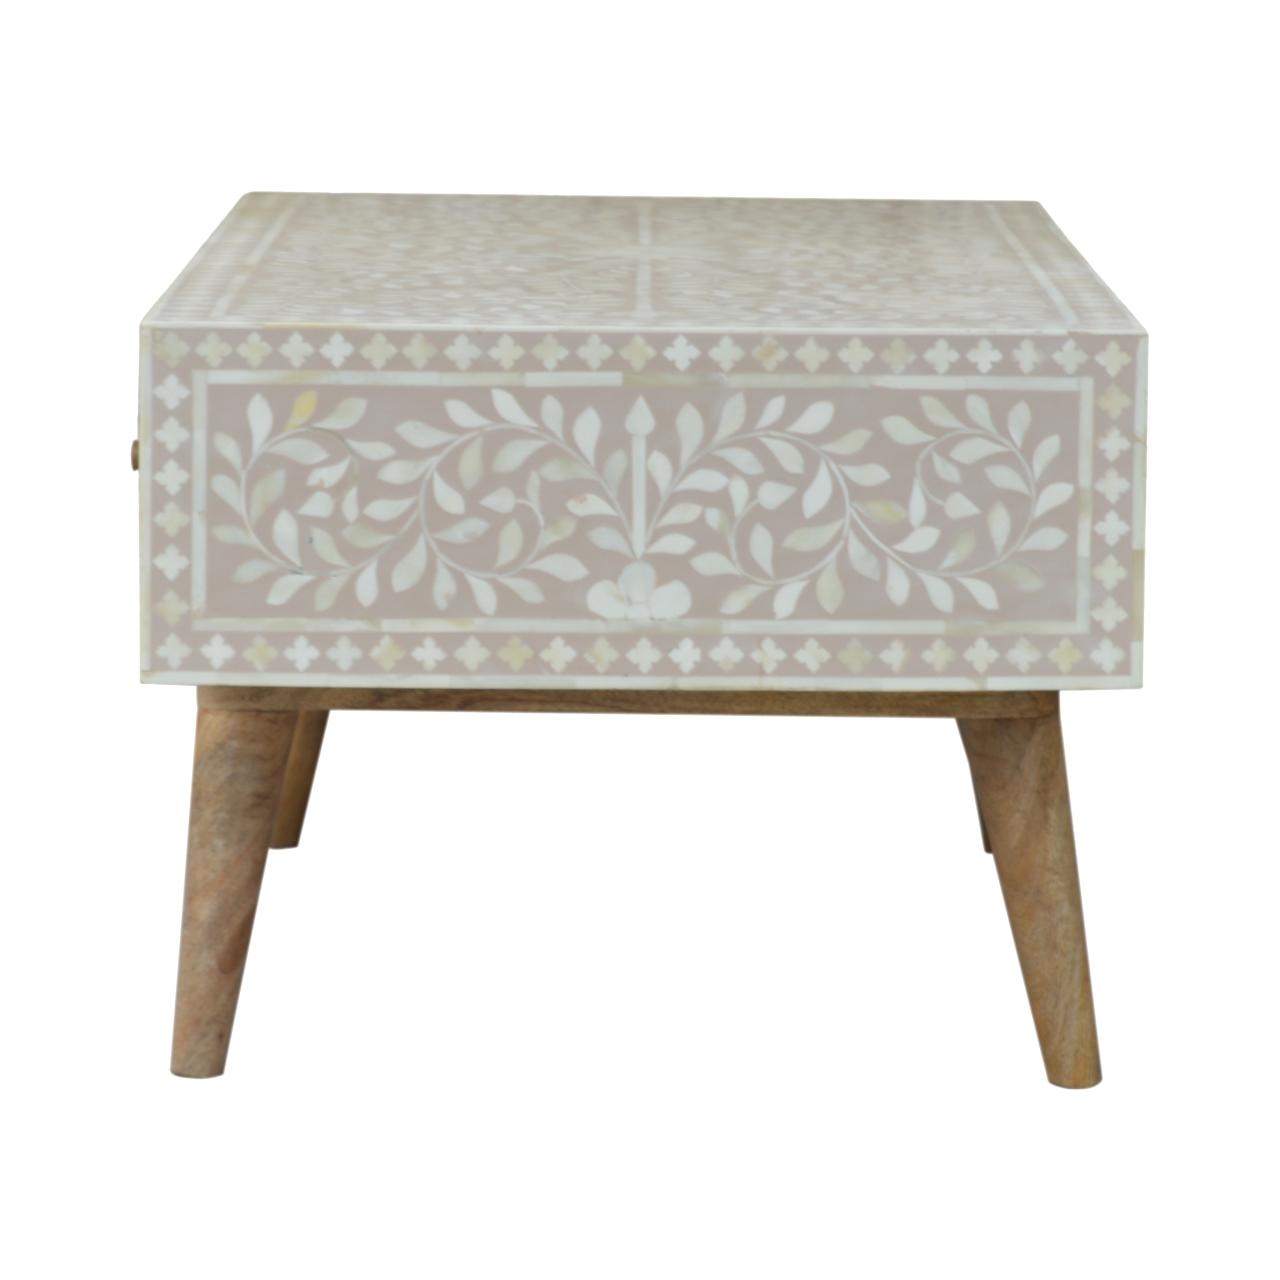 Light Taupe Floral Bone Inlay Coffee Table